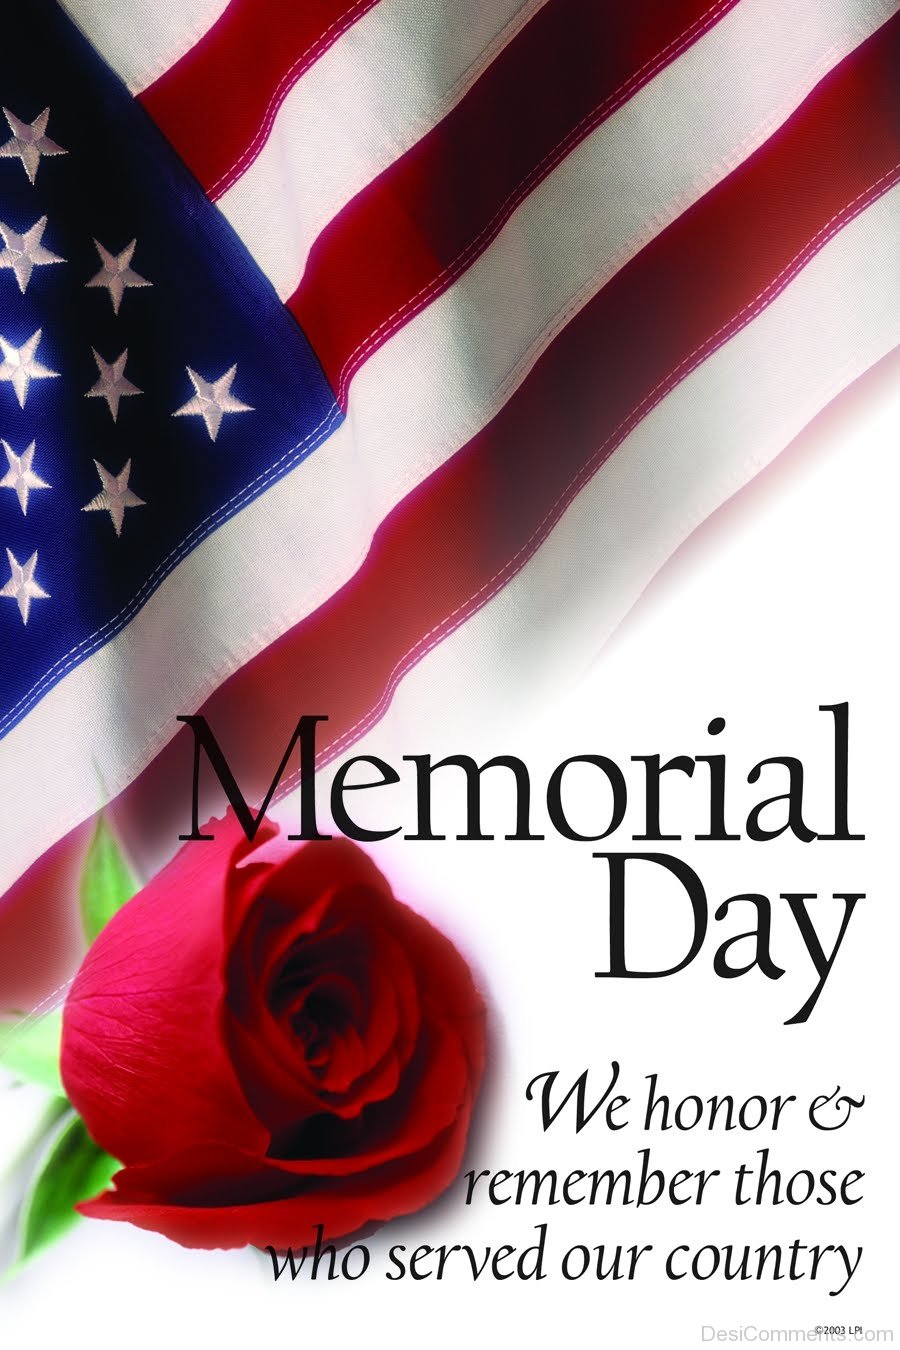 https://www.desicomments.com/wp-content/uploads/Memorial-Day-Image-533x800....